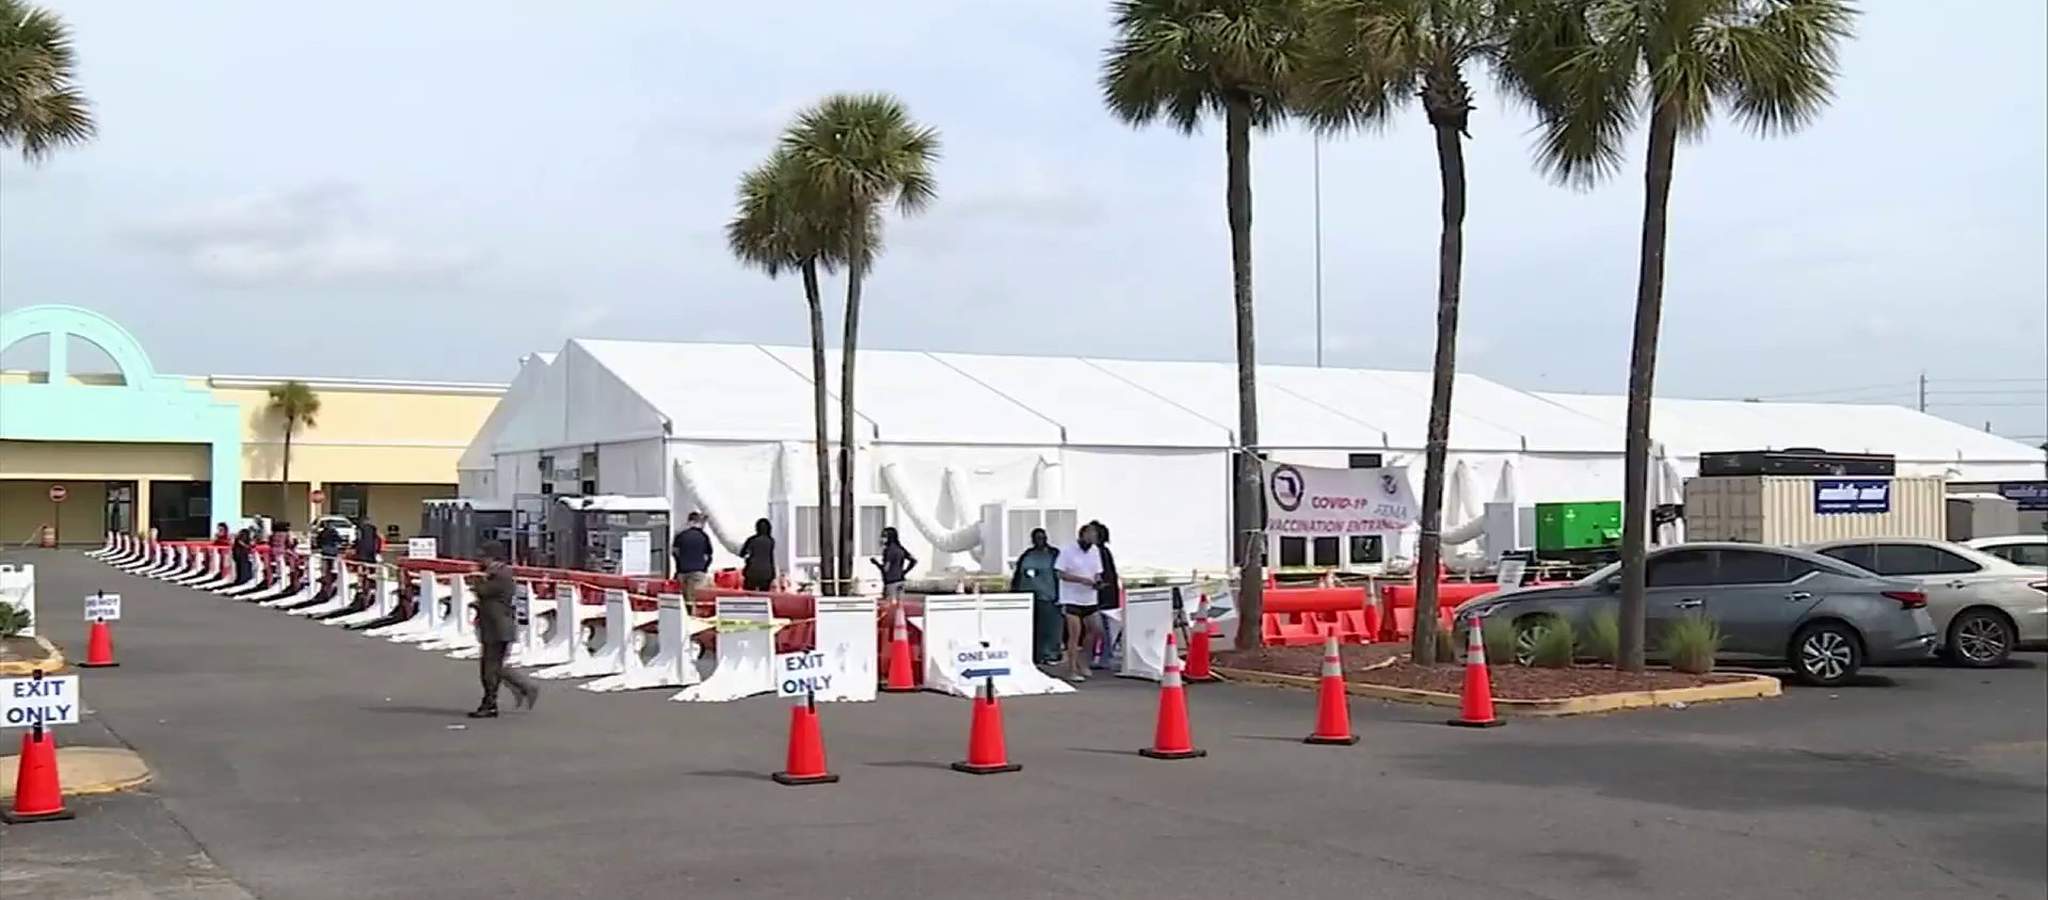 30,000 vaccinations administered at FEMA sites in Jacksonville